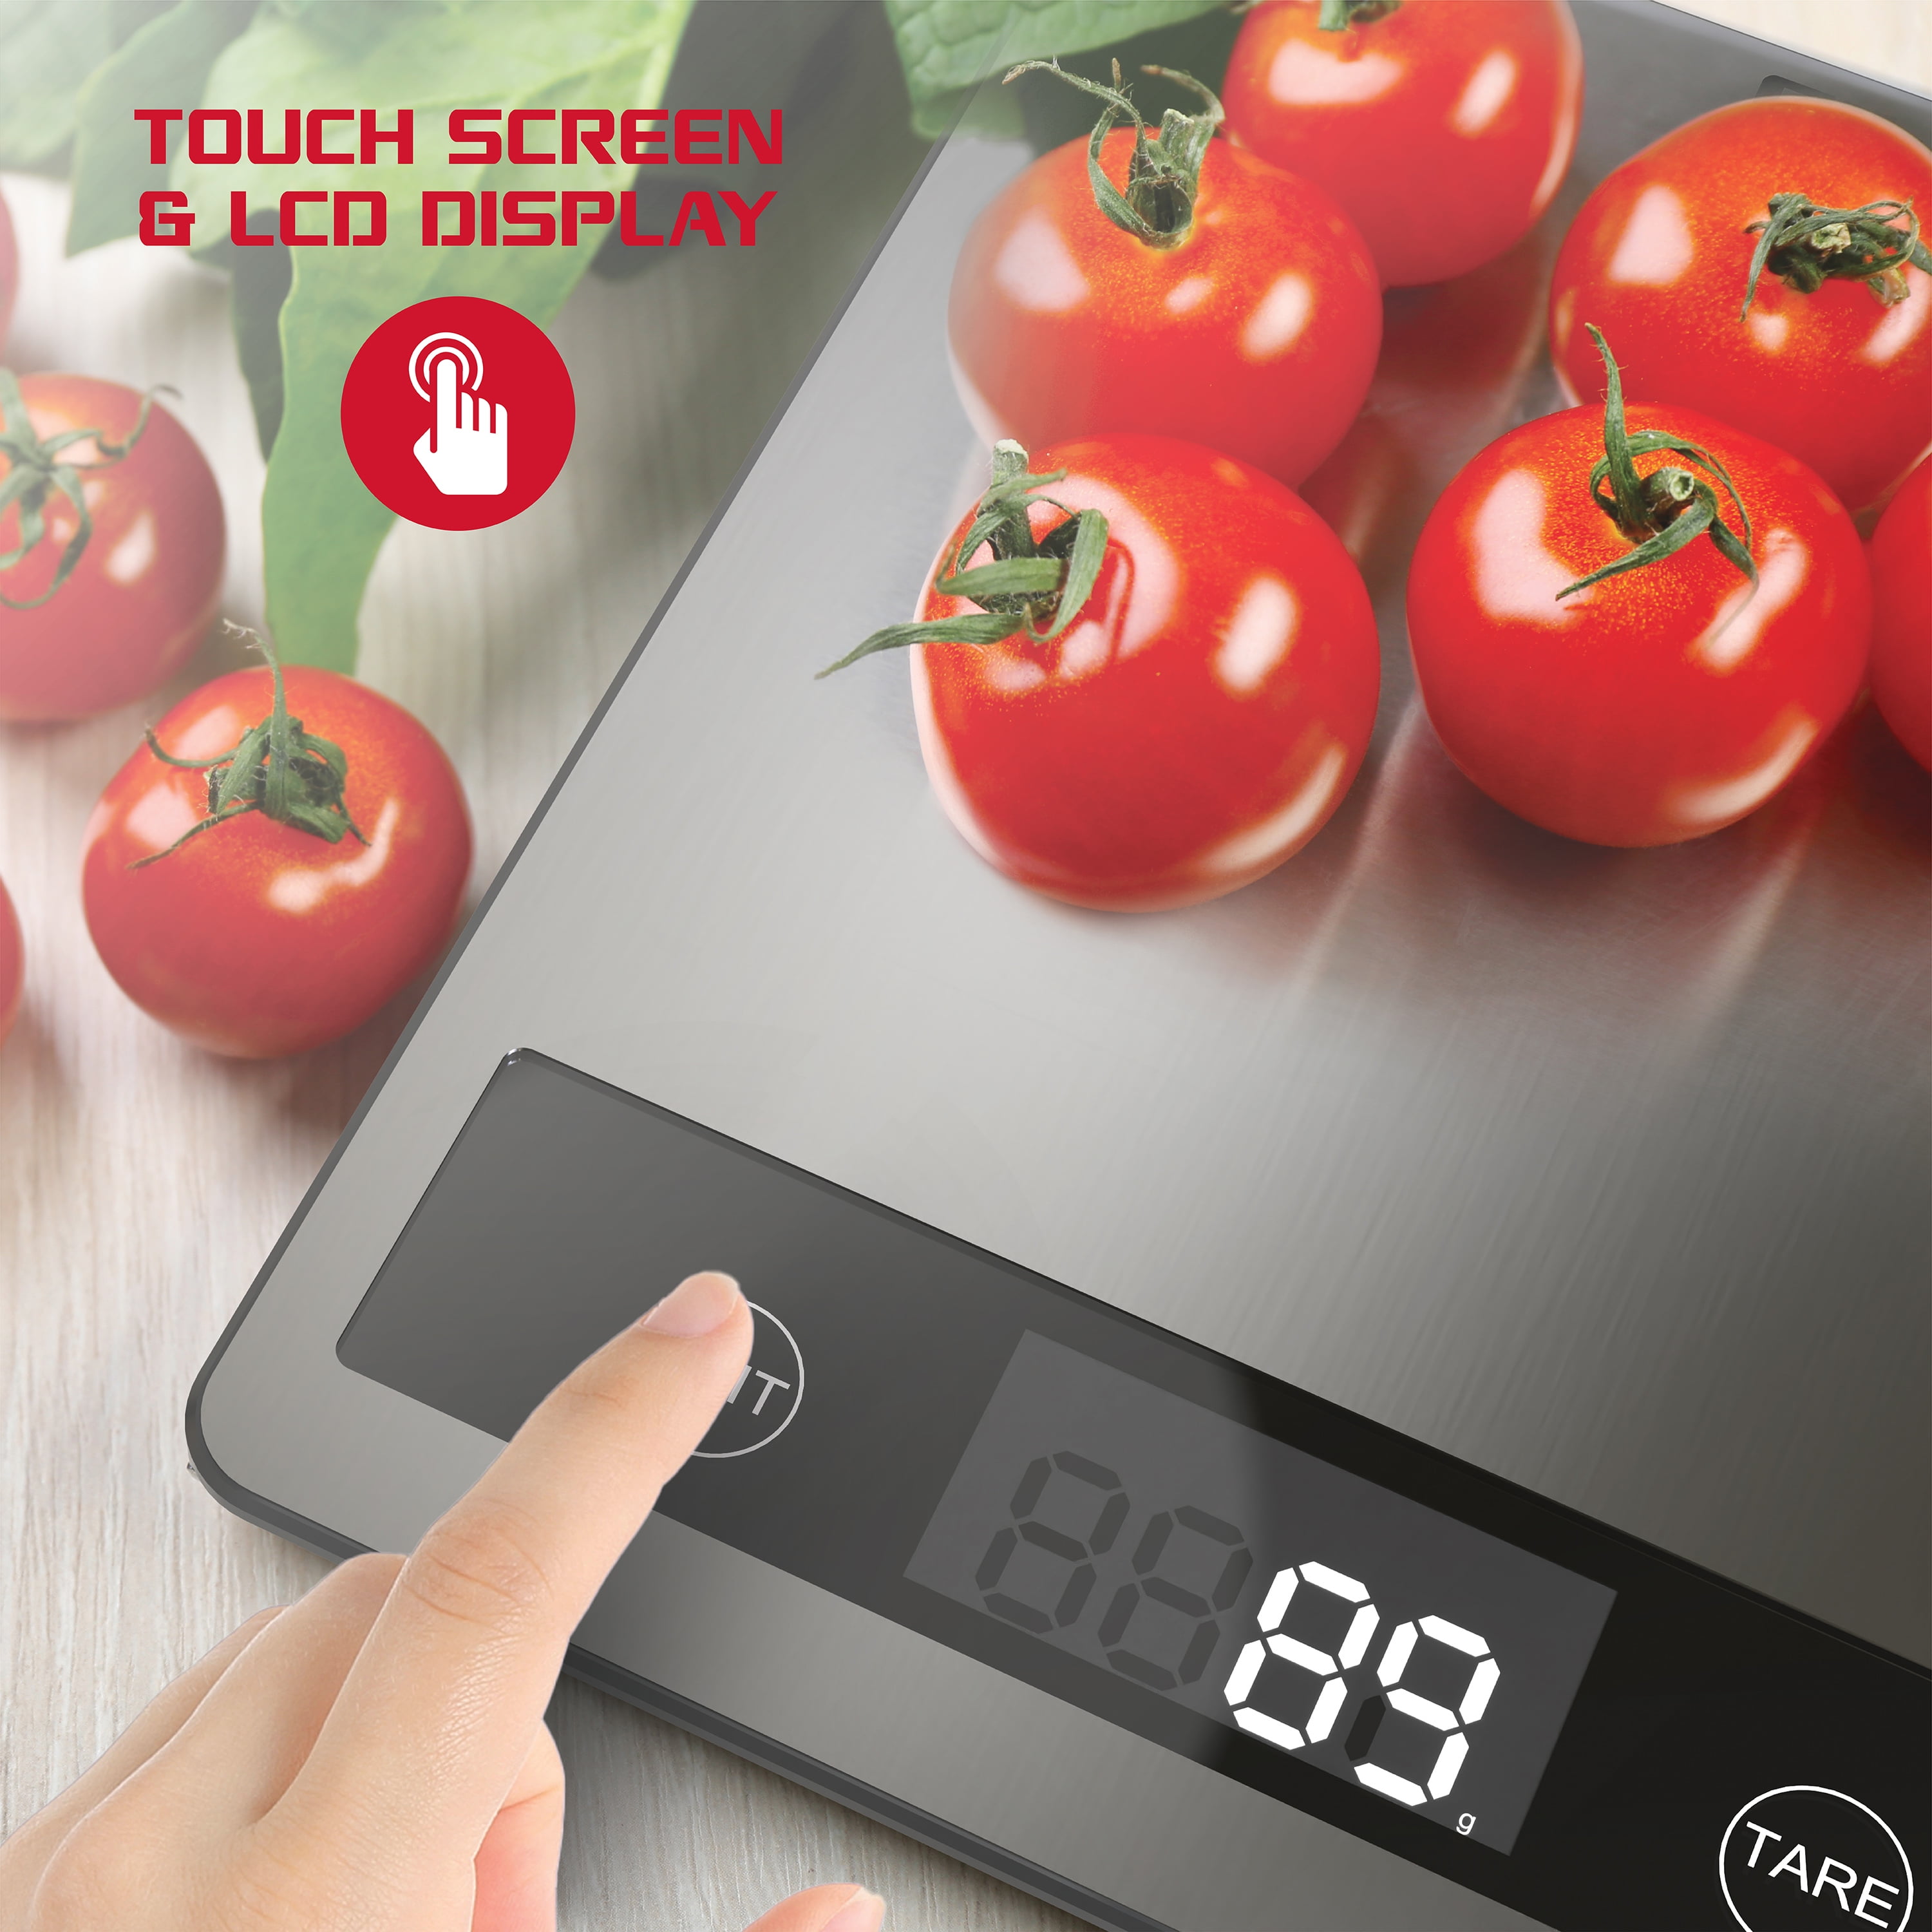  FITINDEX Food Scale for Weight Loss, Kitchen Scale for Food  Ounces and Grams, Digital Smart Food Nutrition Scales, Cooking Coffee Scale  with Smartphone APP for Baking, Calorie, 11lb/5kg: Home & Kitchen